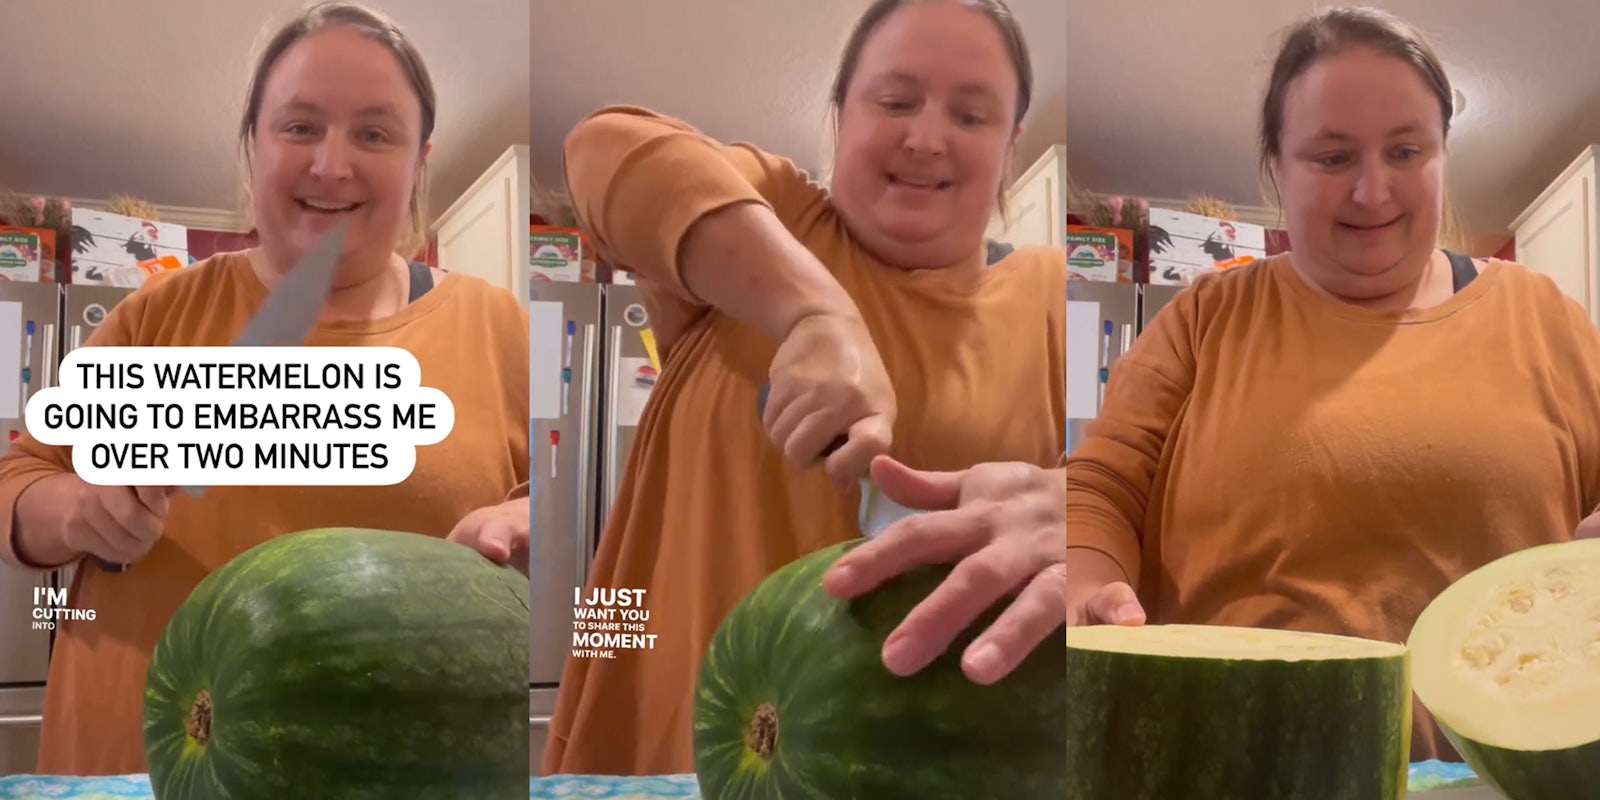 Ka-pow! Woman smashes watermelon with her breast